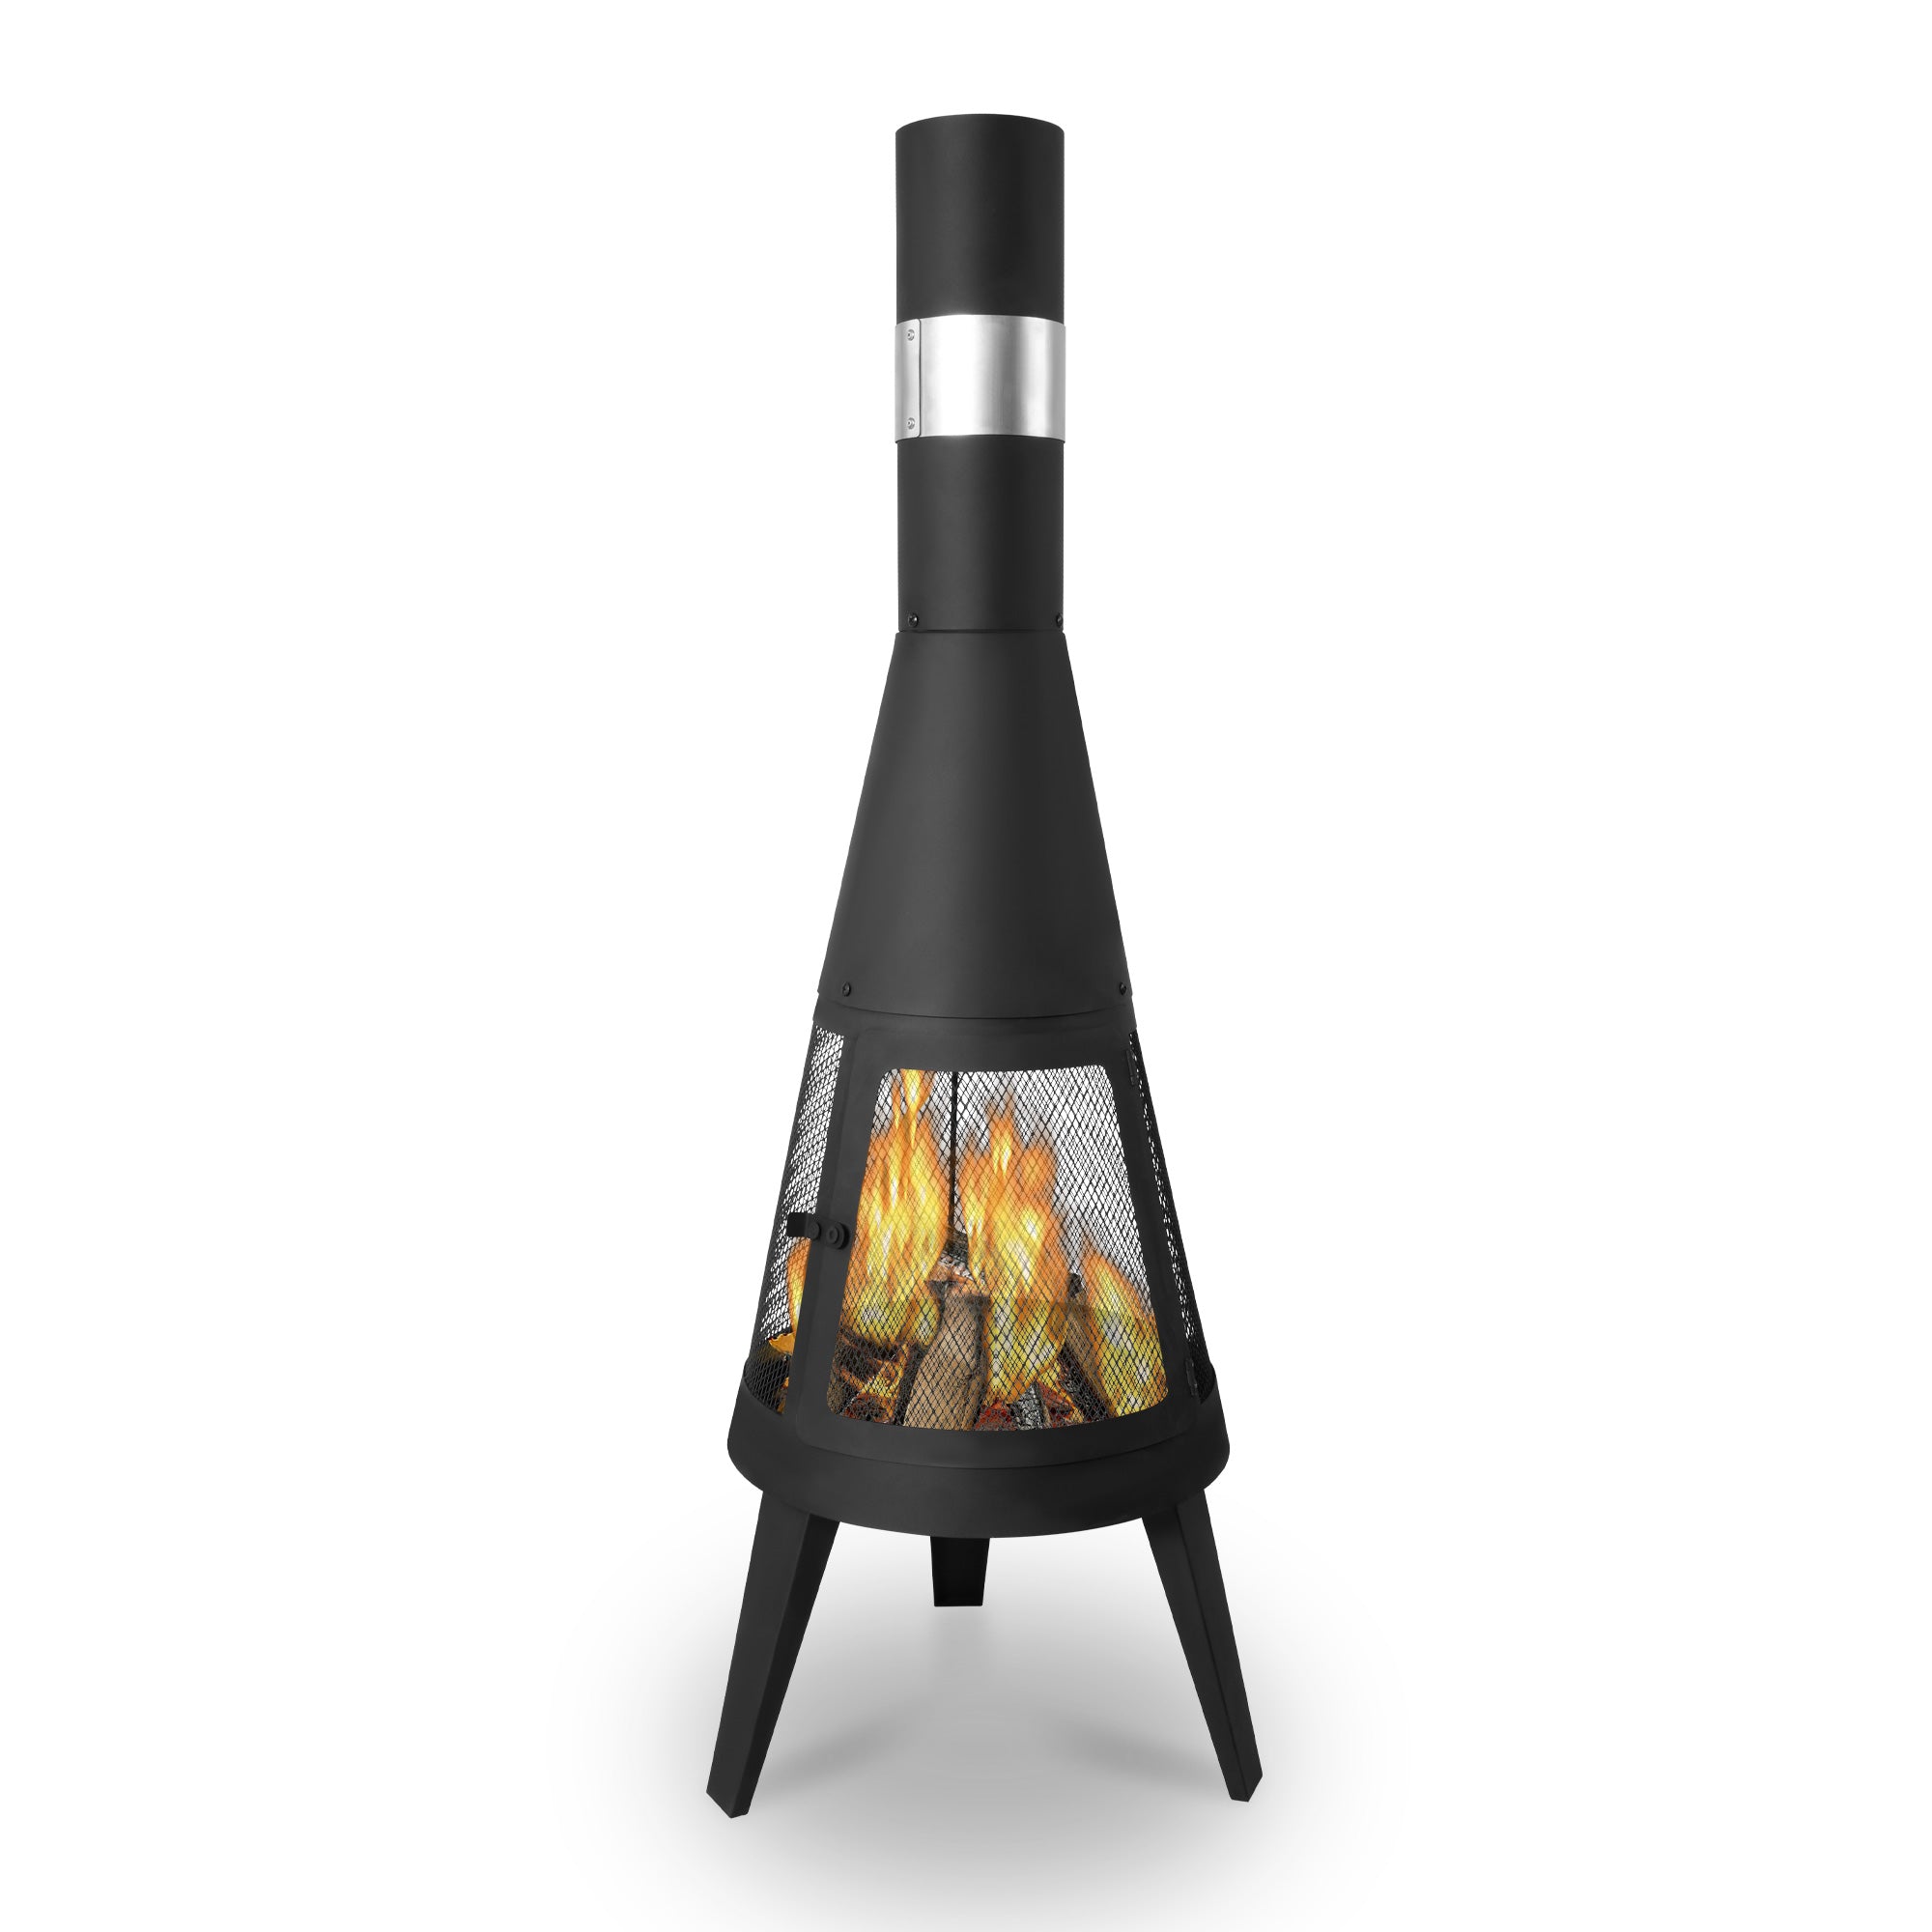 47.6" Tall Chiminea Outdoor Patio Fireplace Metal Wood Burning Outdoor Fire Pit, Black